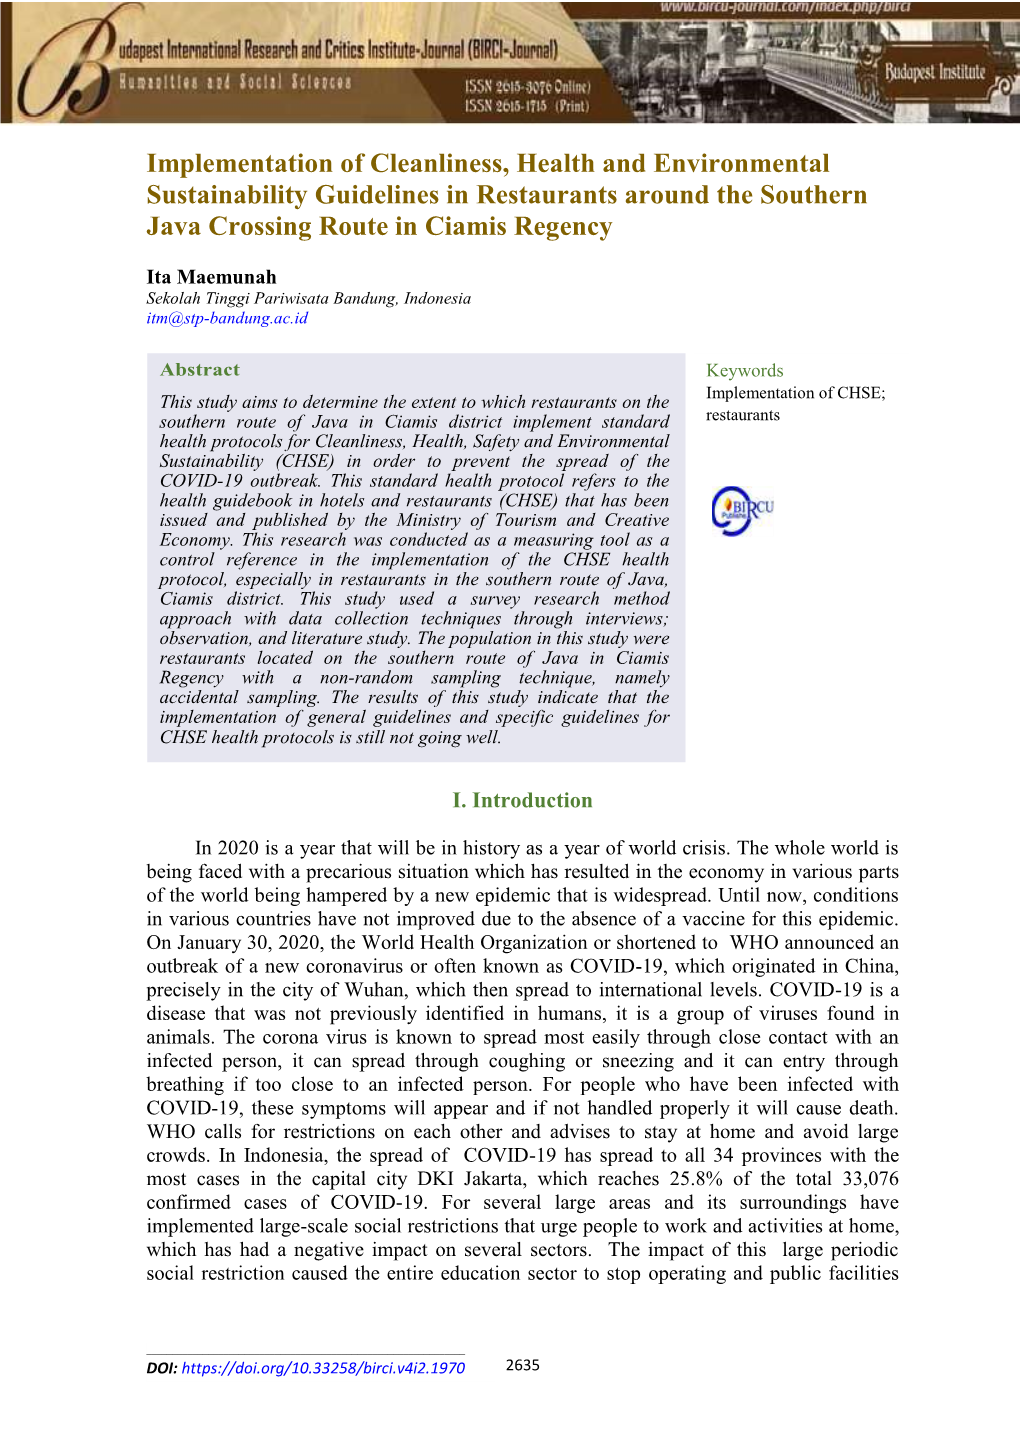 Implementation of Cleanliness, Health and Environmental Sustainability Guidelines in Restaurants Around the Southern Java Crossing Route in Ciamis Regency